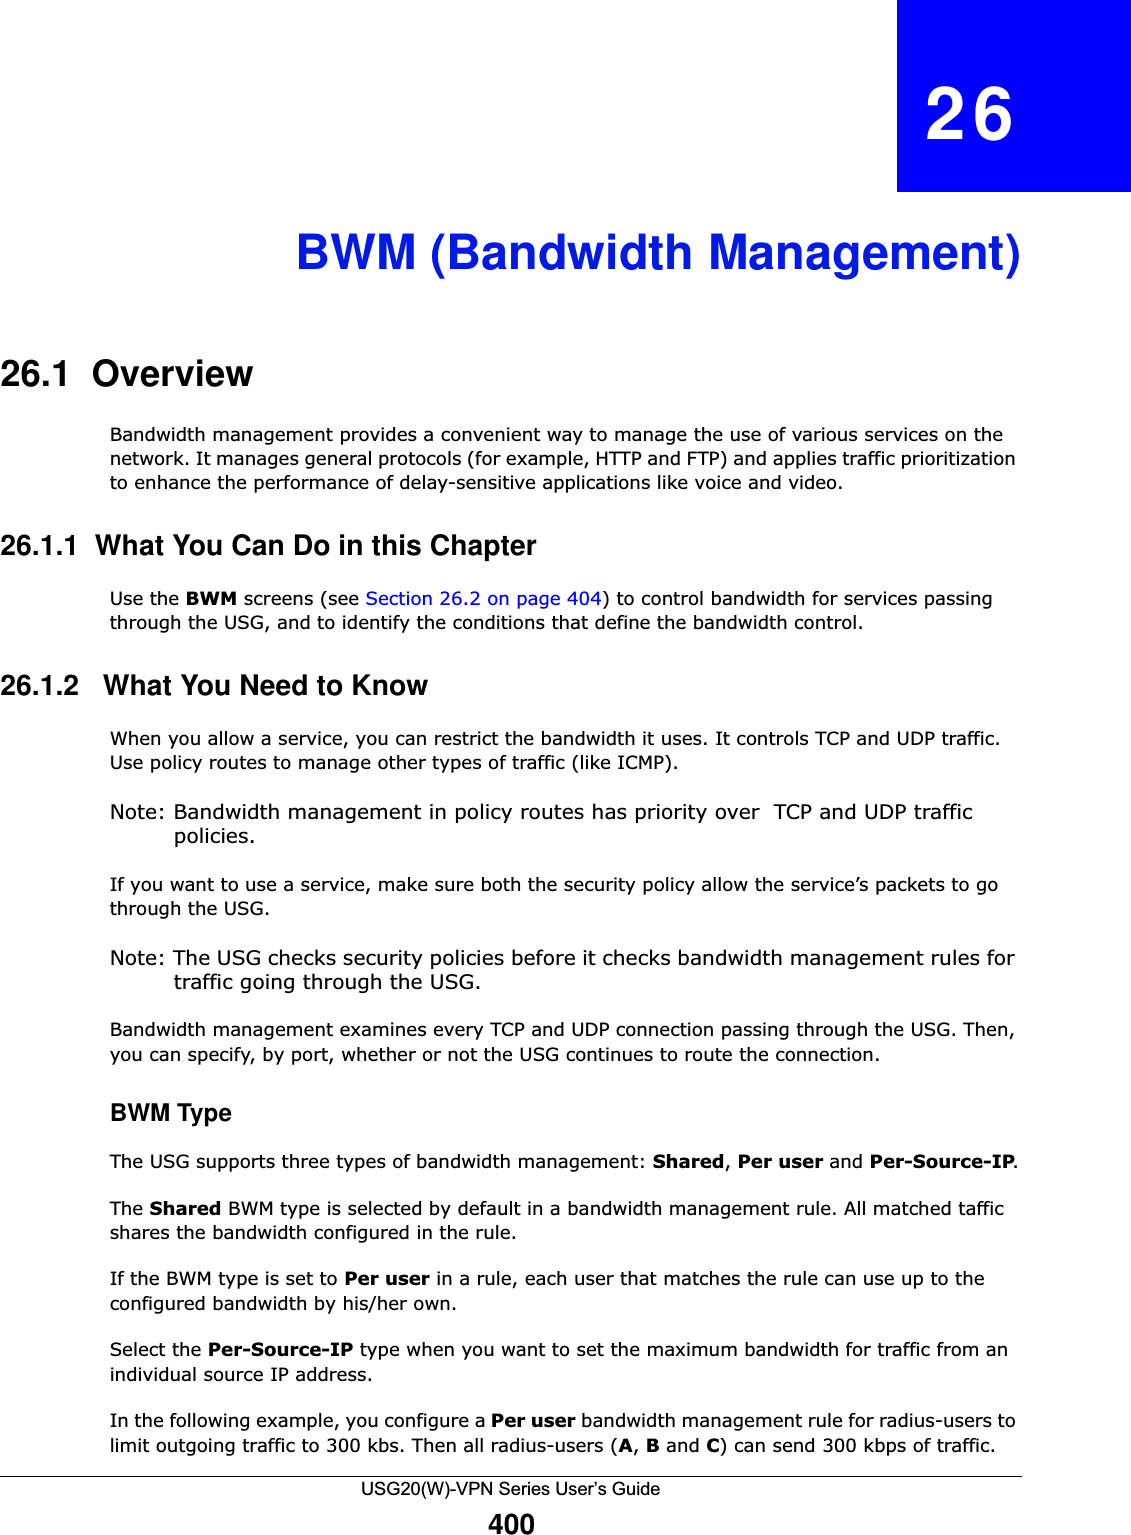 USG20(W)-VPN Series User’s Guide400CHAPTER   26BWM (Bandwidth Management)26.1  OverviewBandwidth management provides a convenient way to manage the use of various services on the network. It manages general protocols (for example, HTTP and FTP) and applies traffic prioritization to enhance the performance of delay-sensitive applications like voice and video.26.1.1  What You Can Do in this ChapterUse the BWM screens (see Section 26.2 on page 404) to control bandwidth for services passing through the USG, and to identify the conditions that define the bandwidth control.26.1.2   What You Need to KnowWhen you allow a service, you can restrict the bandwidth it uses. It controls TCP and UDP traffic. Use policy routes to manage other types of traffic (like ICMP).Note: Bandwidth management in policy routes has priority over  TCP and UDP traffic policies.If you want to use a service, make sure both the security policy allow the service’s packets to go through the USG.Note: The USG checks security policies before it checks bandwidth management rules for traffic going through the USG.Bandwidth management examines every TCP and UDP connection passing through the USG. Then, you can specify, by port, whether or not the USG continues to route the connection.BWM TypeThe USG supports three types of bandwidth management: Shared, Per user and Per-Source-IP.The Shared BWM type is selected by default in a bandwidth management rule. All matched taffic shares the bandwidth configured in the rule. If the BWM type is set to Per user in a rule, each user that matches the rule can use up to the configured bandwidth by his/her own. Select the Per-Source-IP type when you want to set the maximum bandwidth for traffic from an individual source IP address.In the following example, you configure a Per user bandwidth management rule for radius-users to limit outgoing traffic to 300 kbs. Then all radius-users (A, B and C) can send 300 kbps of traffic.